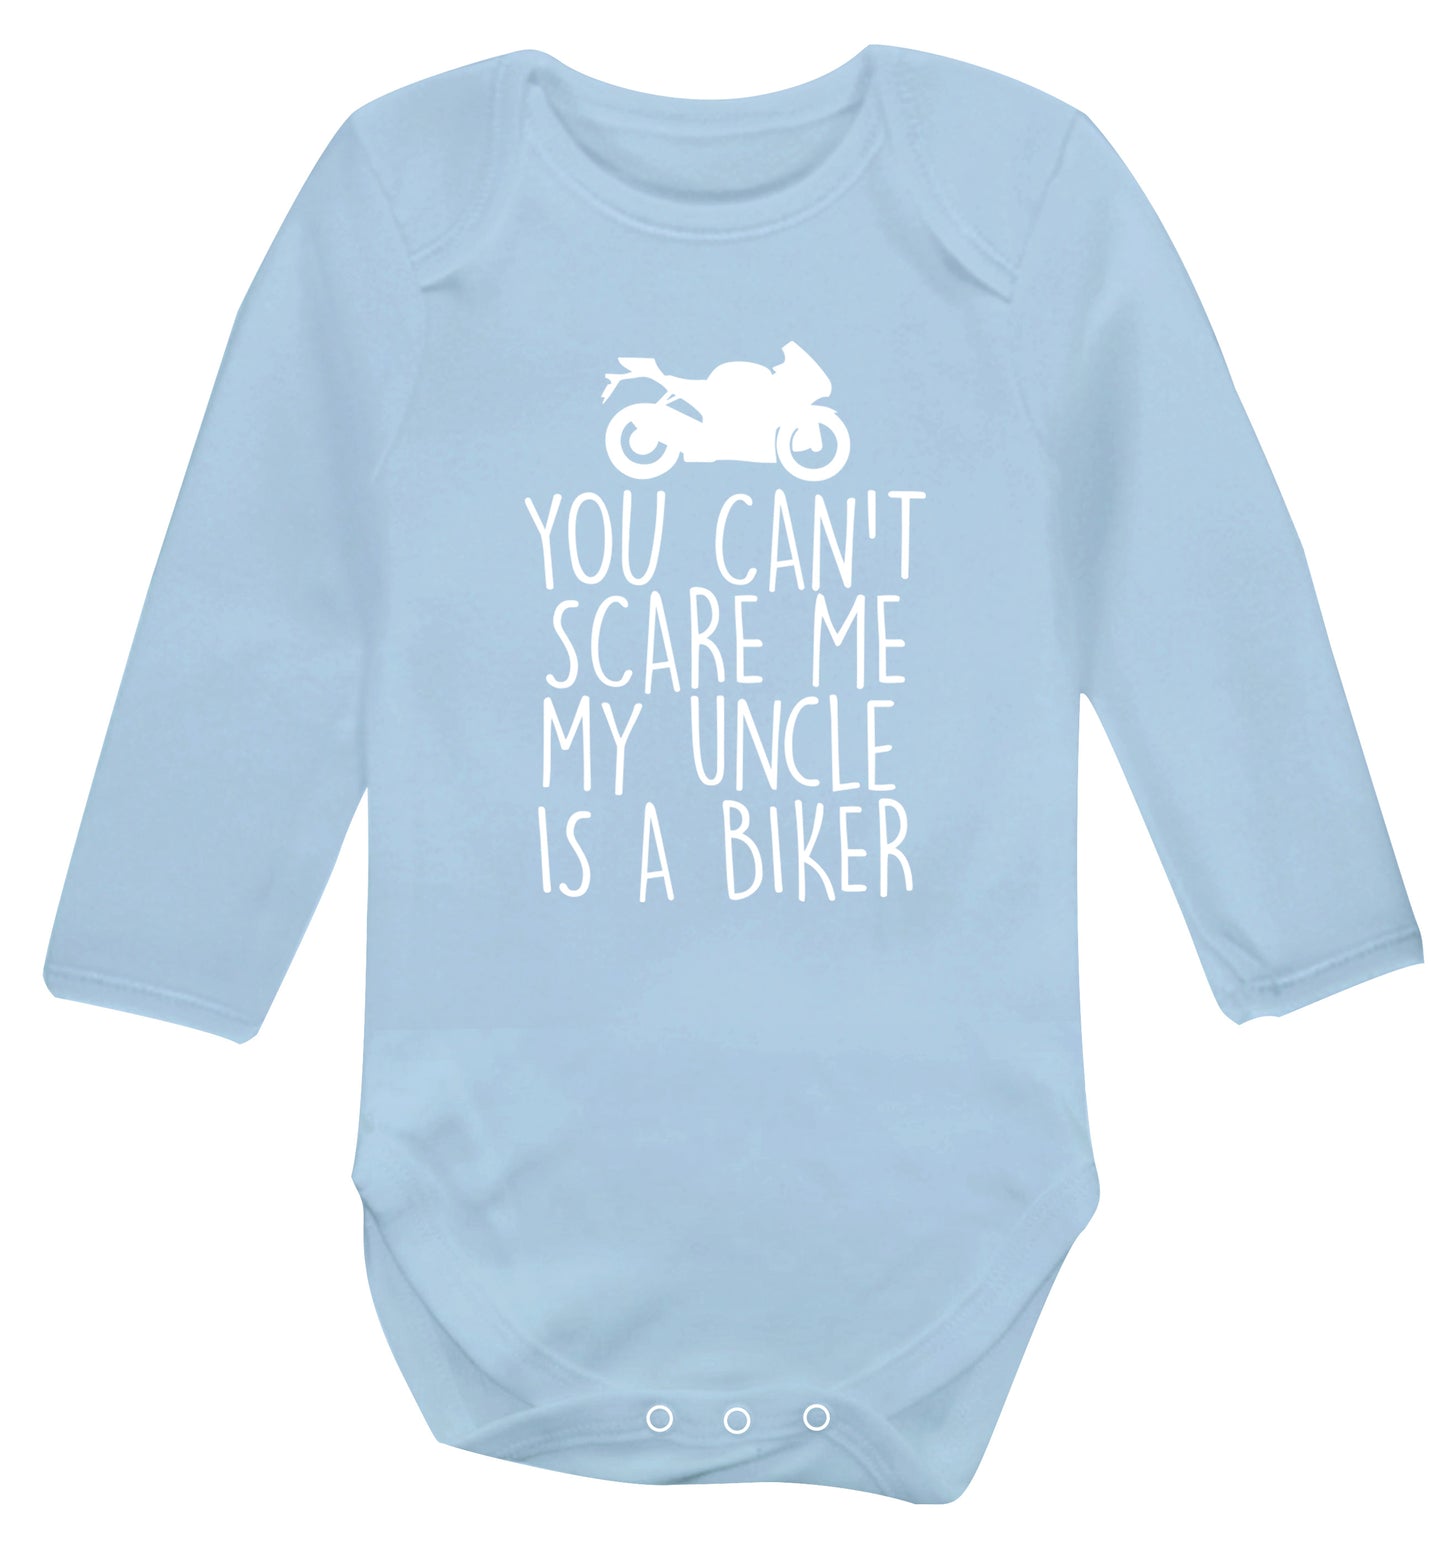 You can't scare me my uncle is a biker Baby Vest long sleeved pale blue 6-12 months